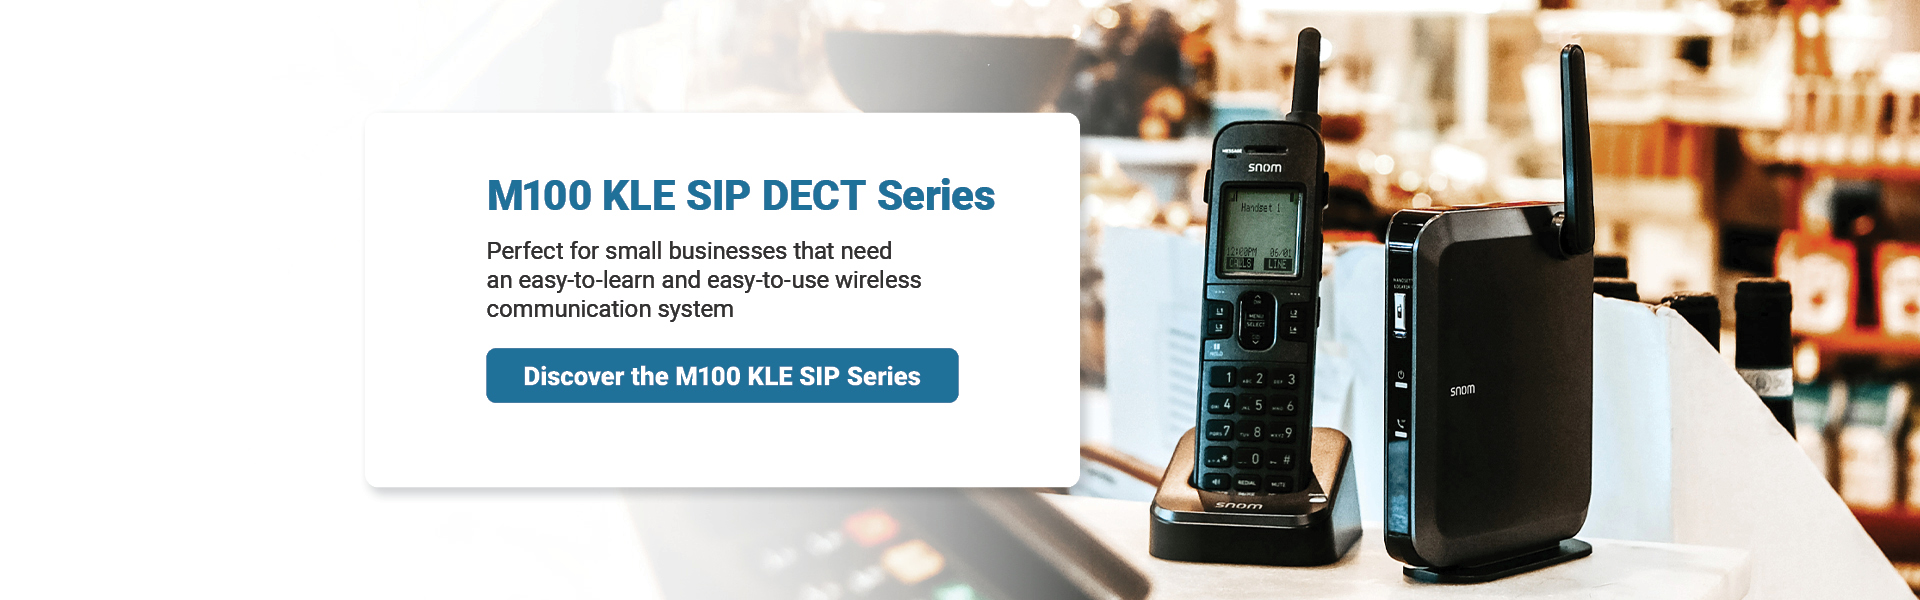 M100 KLE SIP DECT Series | Perfect for small businesses that need an easy-to-learn and easy-to-use wireless communication system | Discover the M100 KLE SIP Series